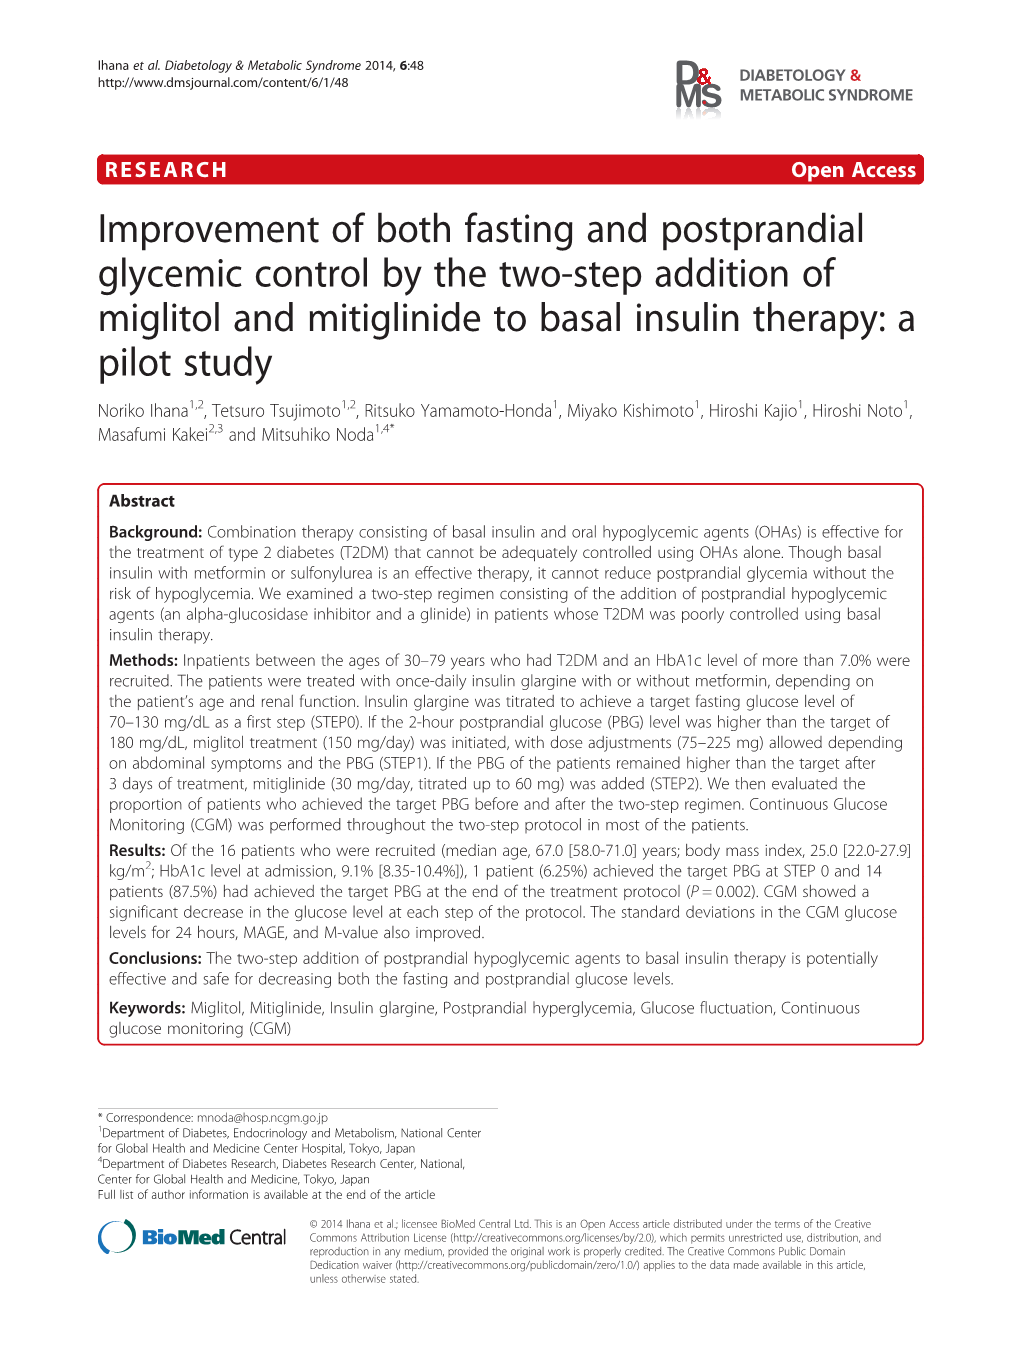 Improvement of Both Fasting and Postprandial Glycemic Control by The